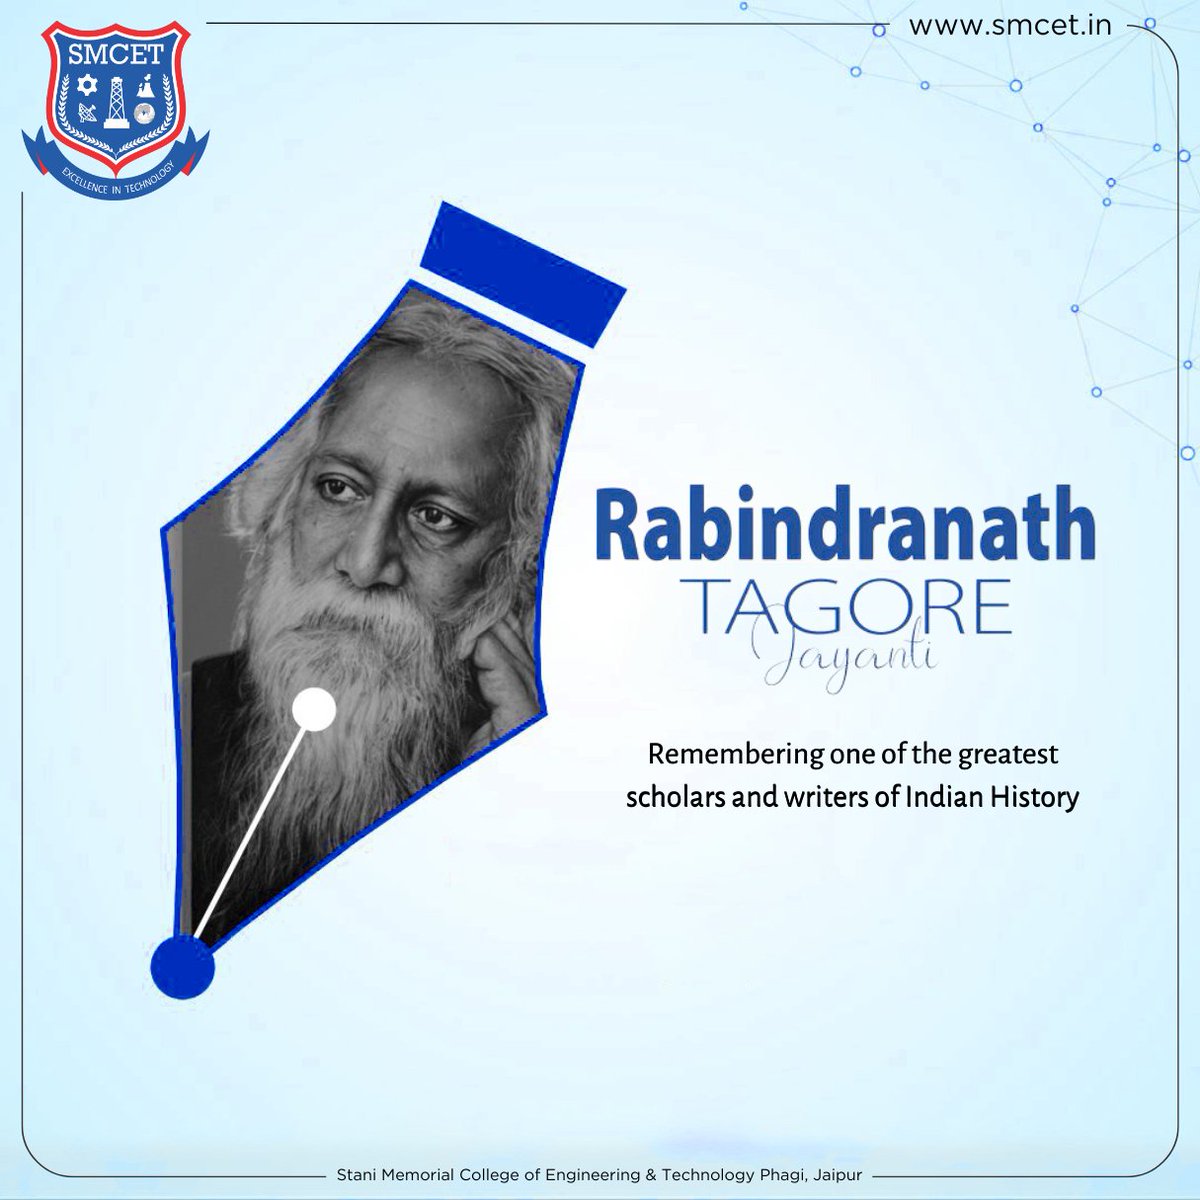 Wishes you all Happy Rabindranath Tagore Jayanti!

#rabindarnathtagore #Tagorejayanti2024 #tagore #rabindarnathtagorejayanti #Tagorejayanti #SMCET #Engineeringcollege